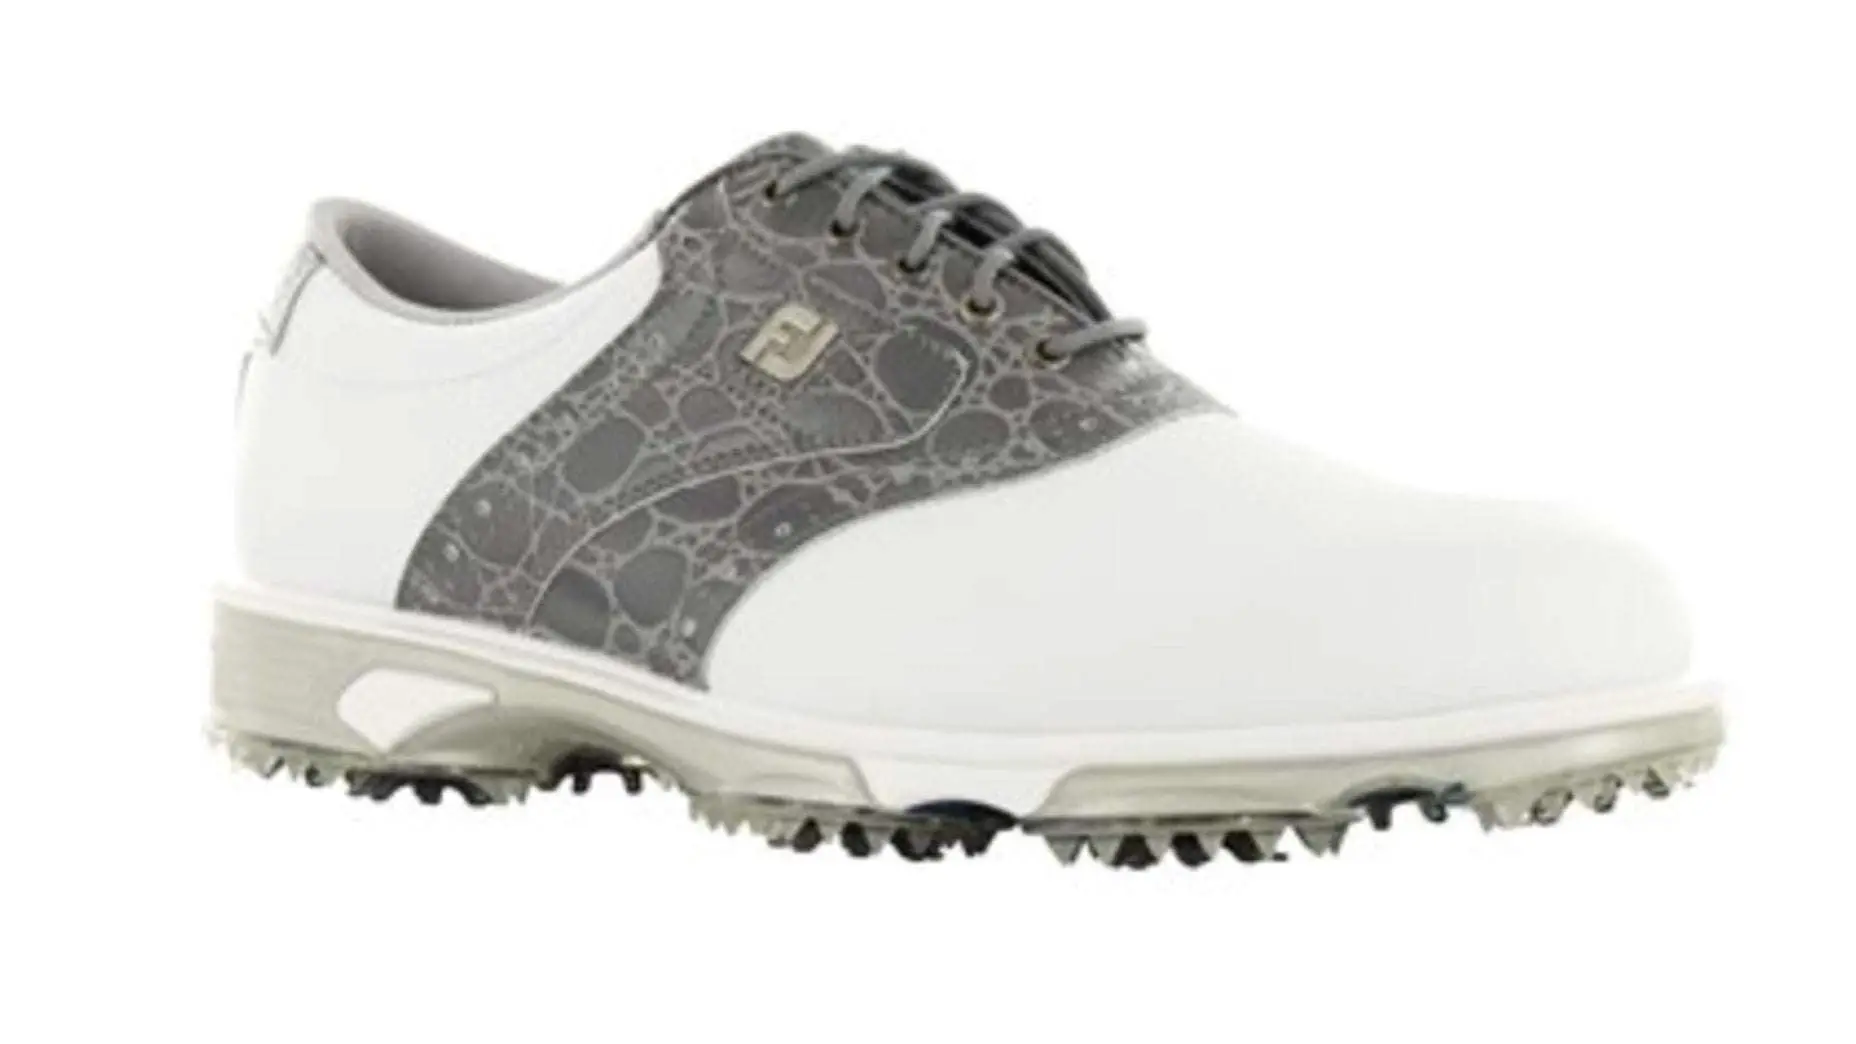 Best golf shoes: 10 comfortable pairs to buy for Father